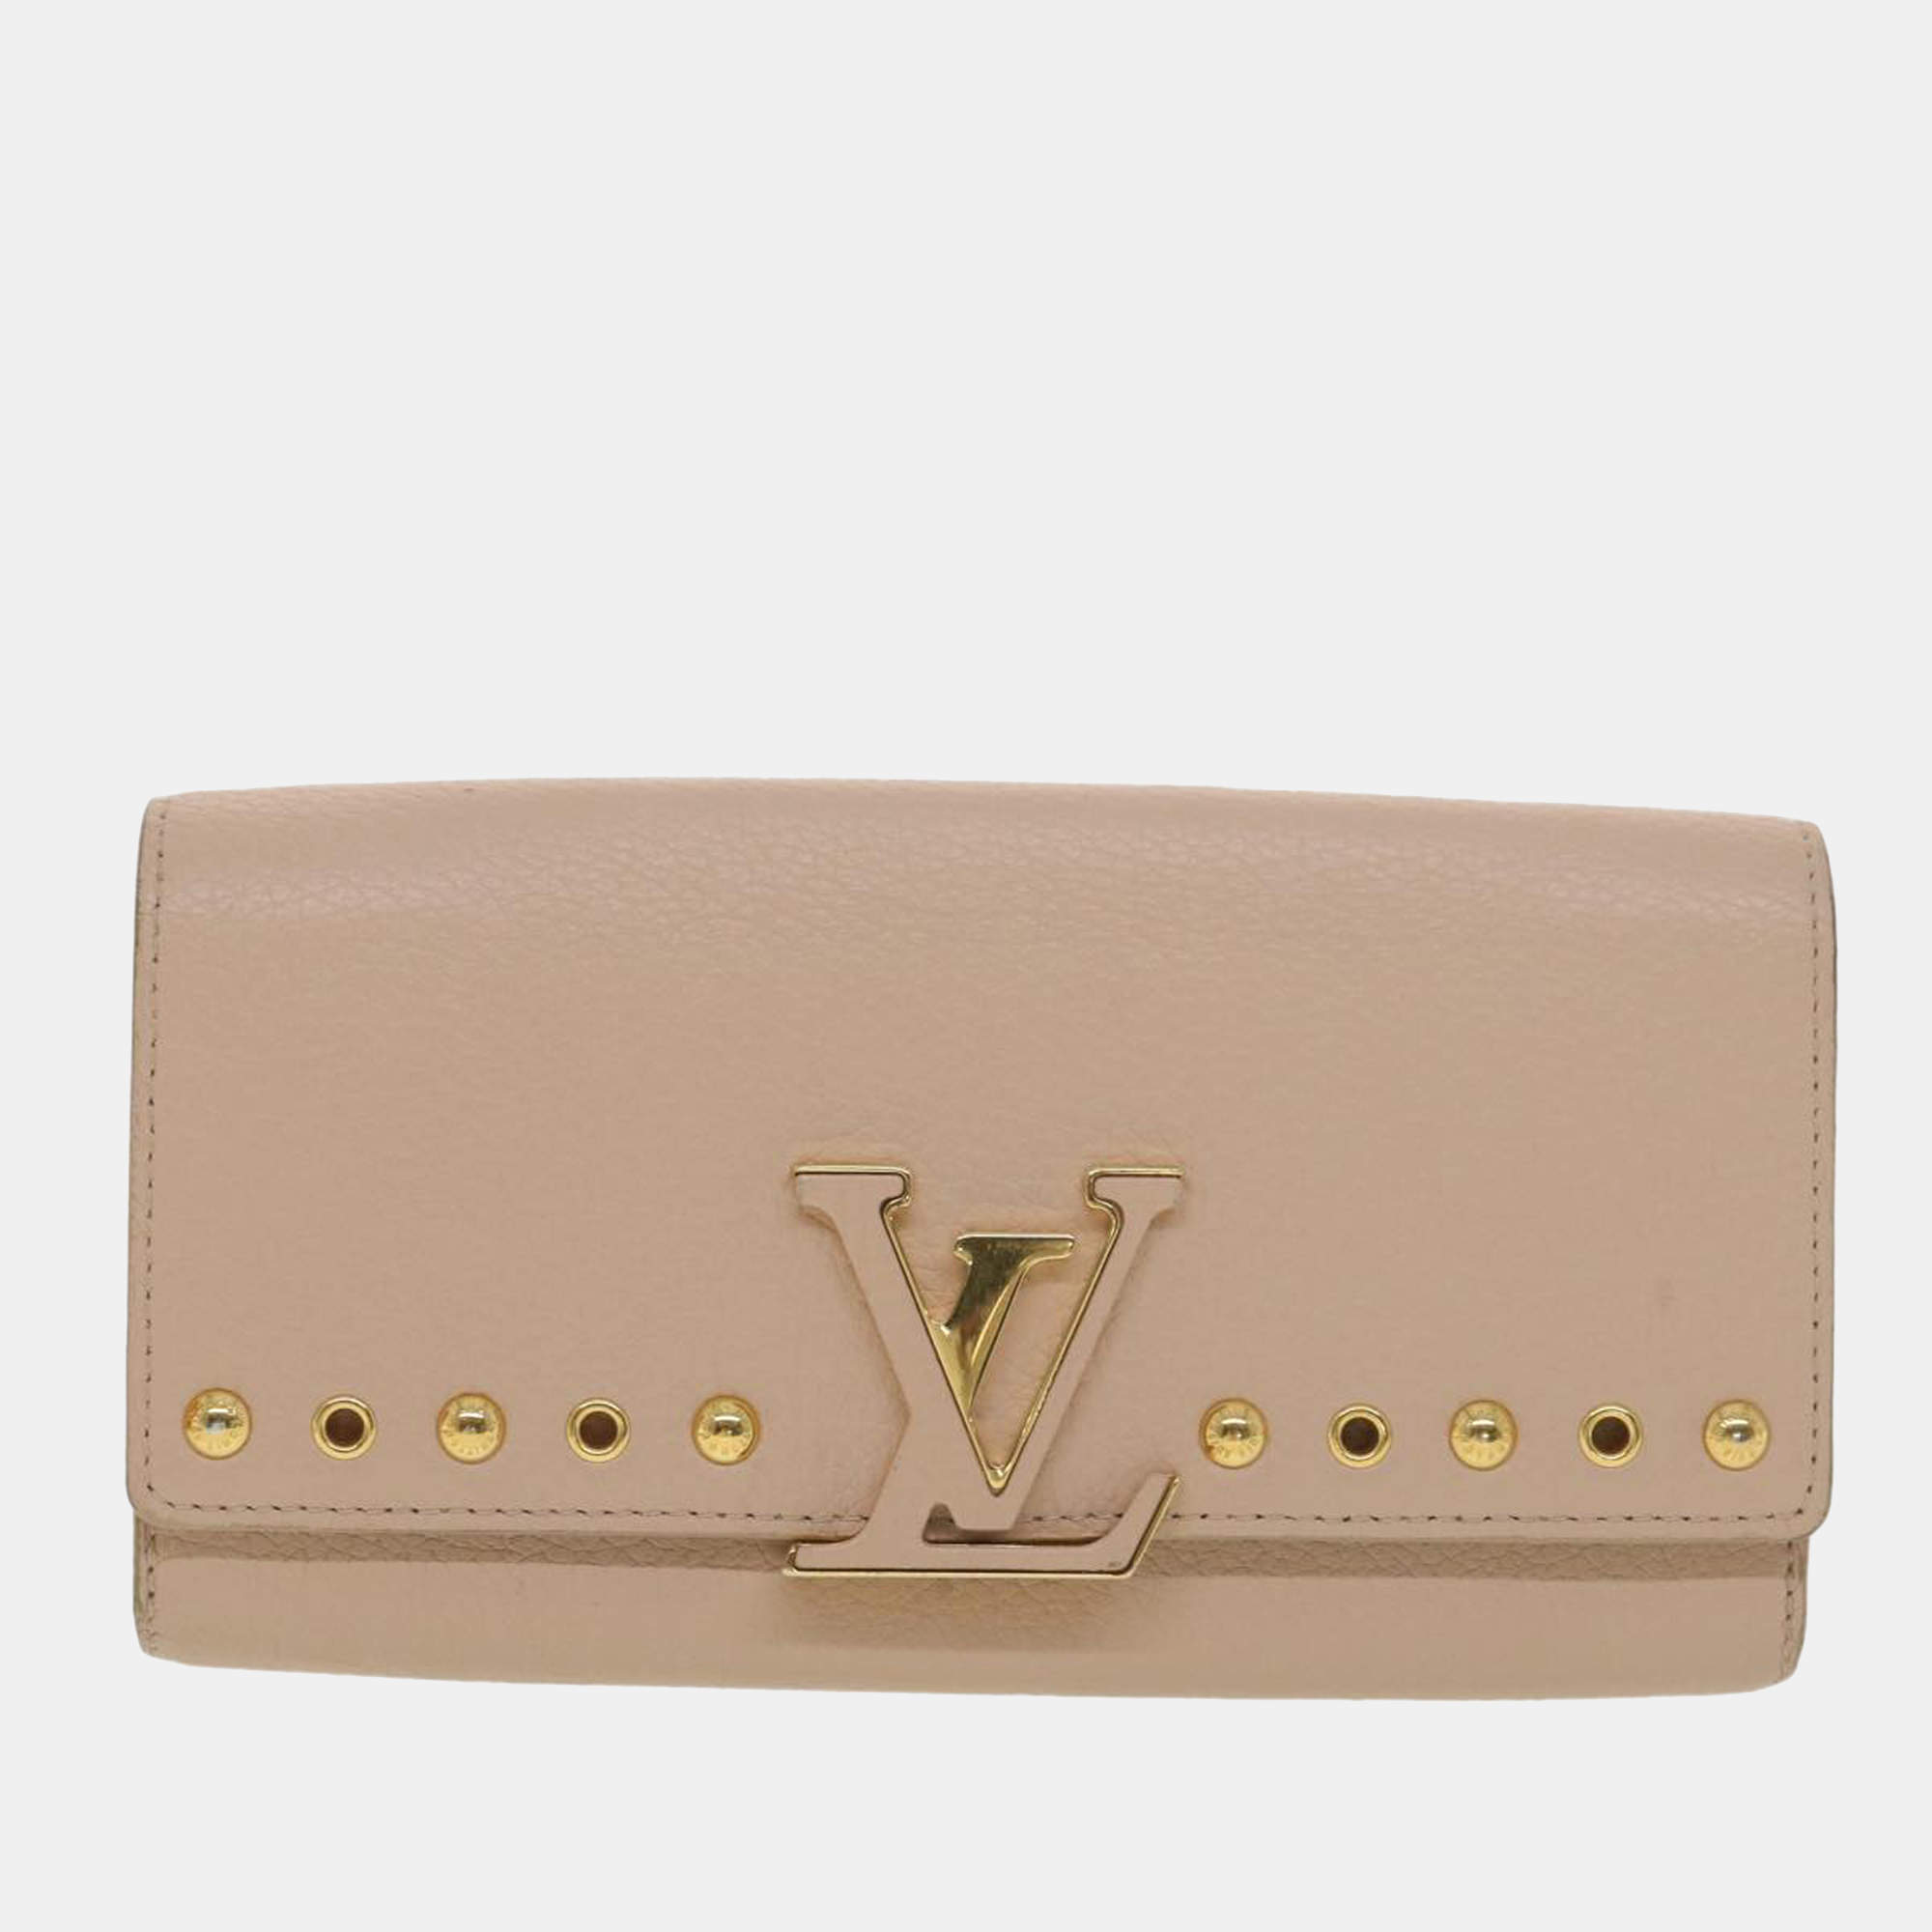 Louis Vuitton Capucines Compact Wallet Black Pink Authentic From